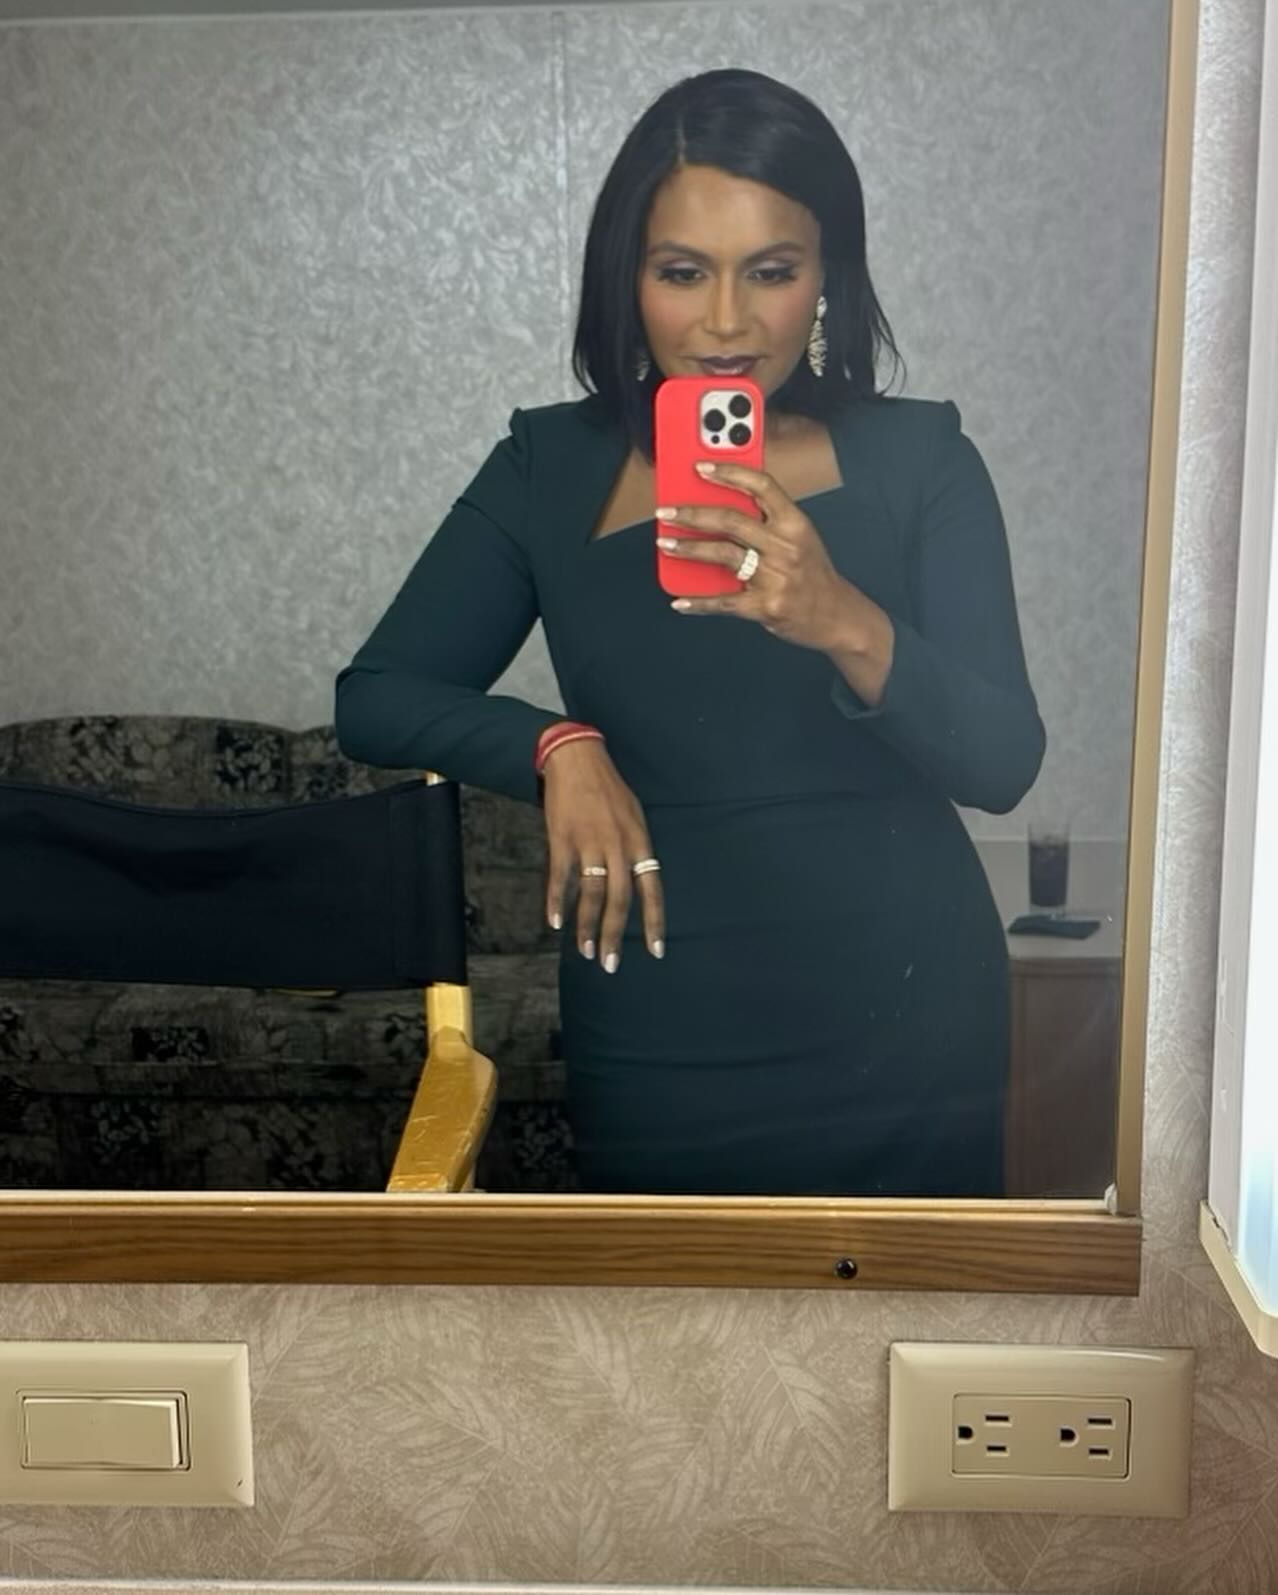 Mindy also posted a mirror selfie showing off her 40-pound weight loss